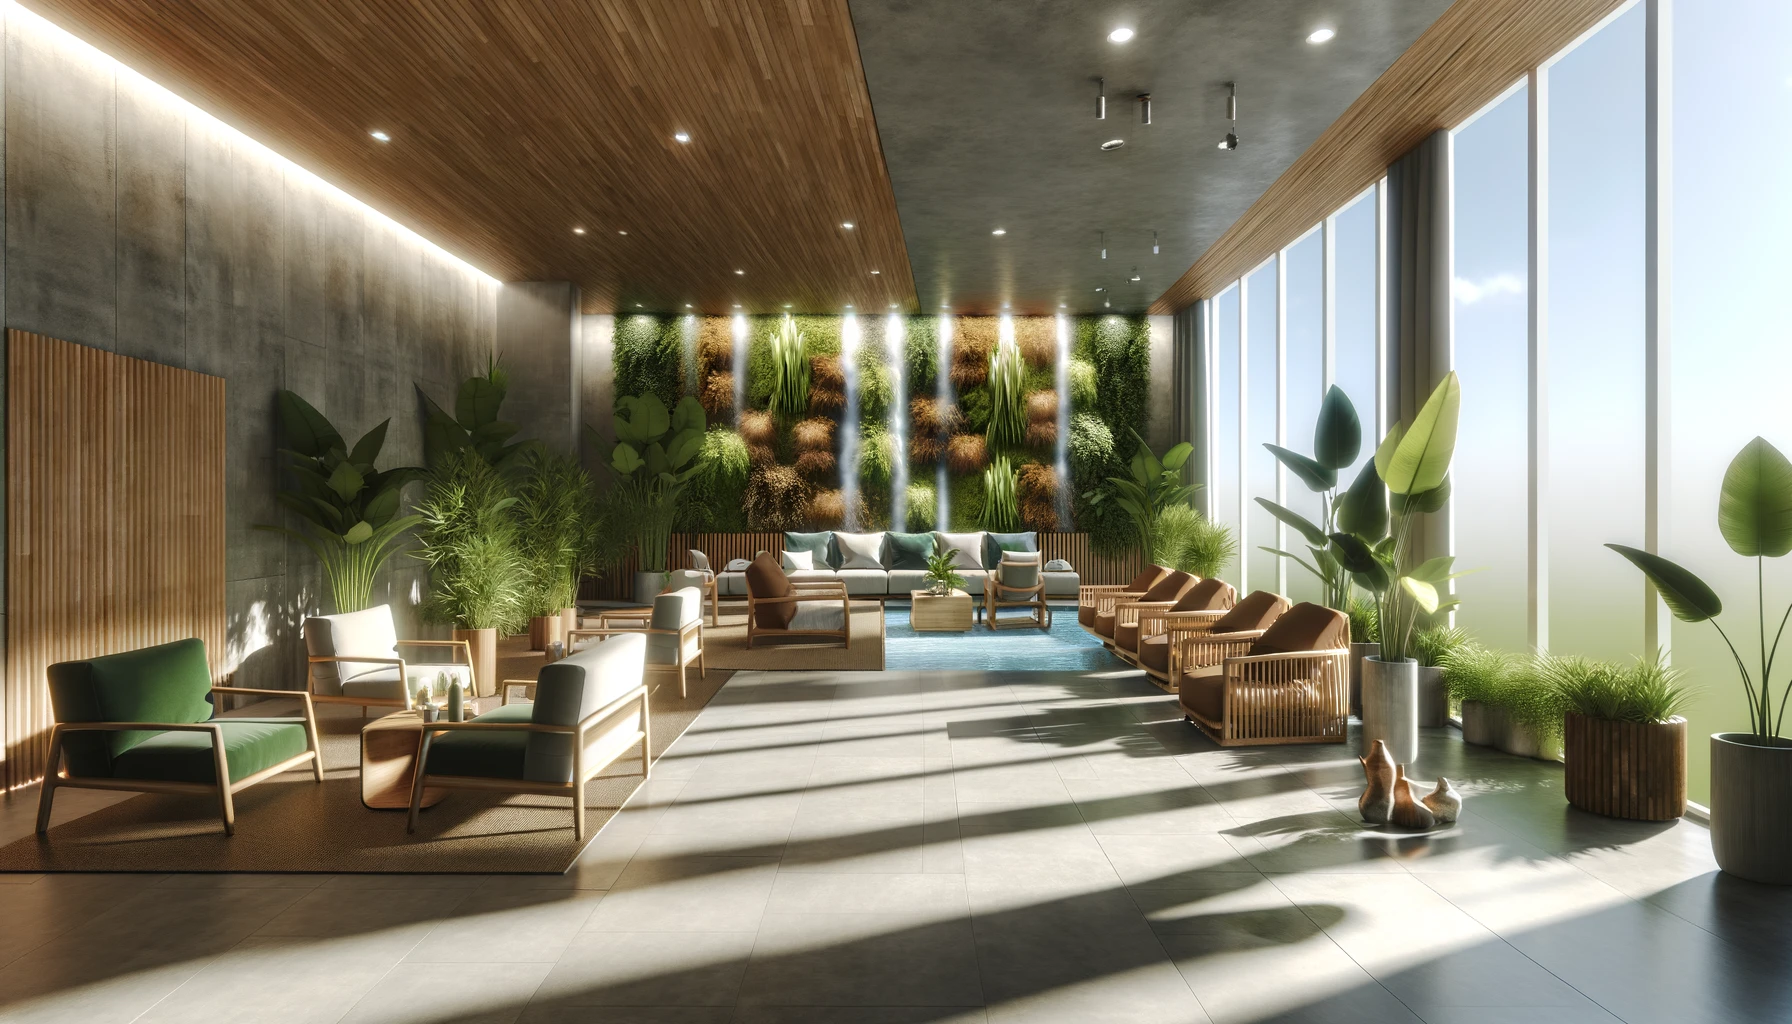 Modern indoor lounge with vertical gardens and natural light.